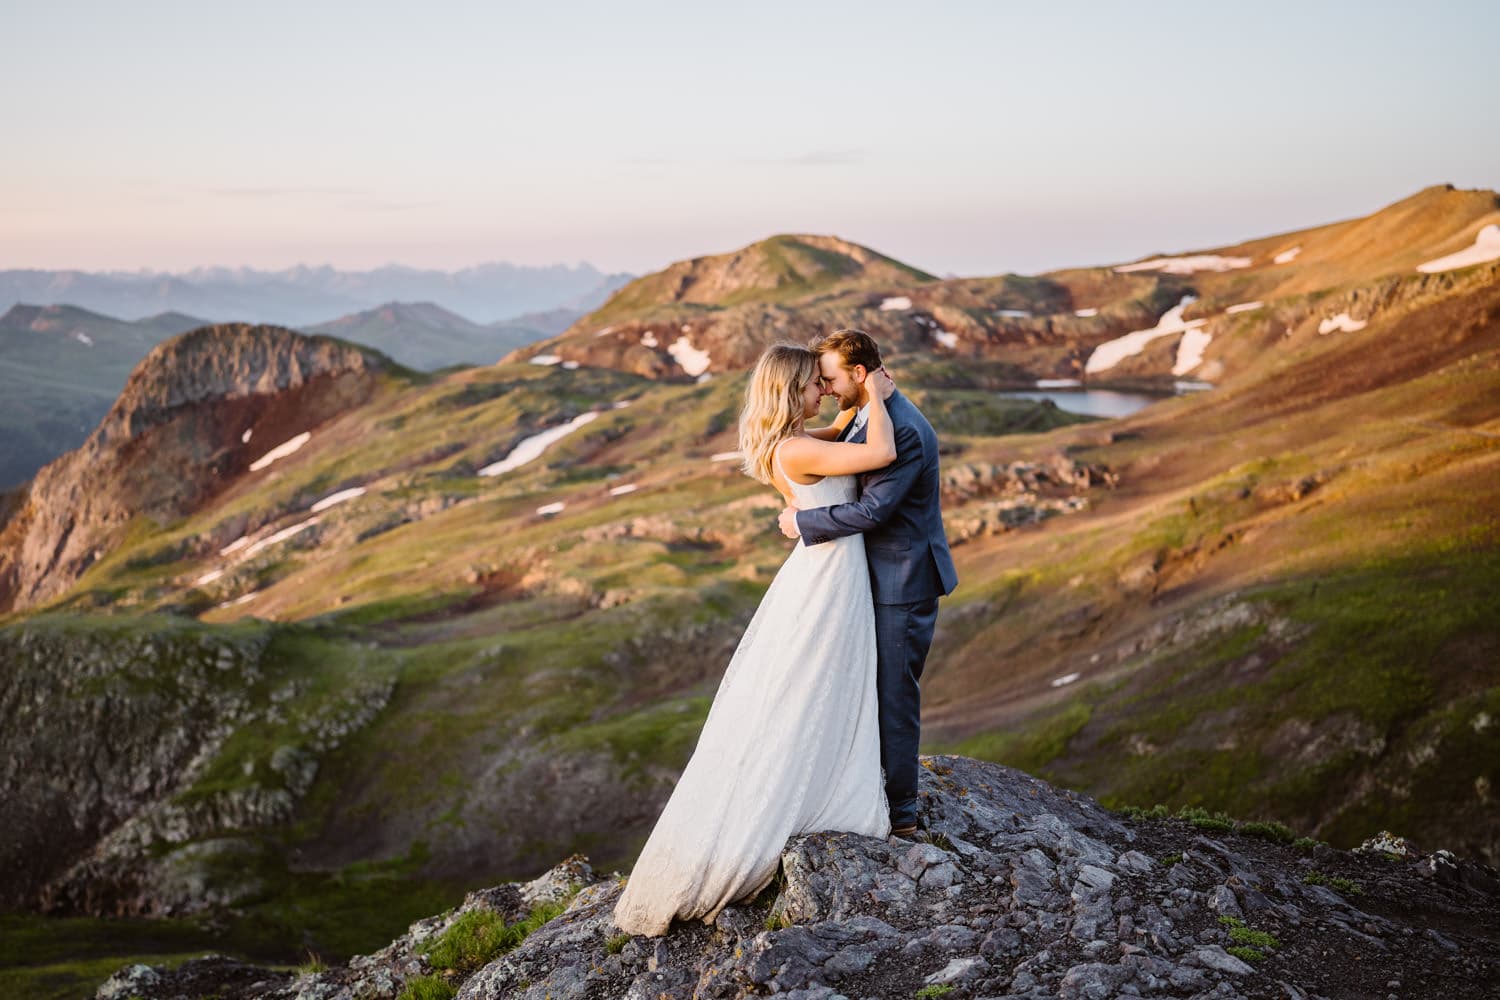 An elopement couple on a rock overlooking a mountain pass in Colorado.